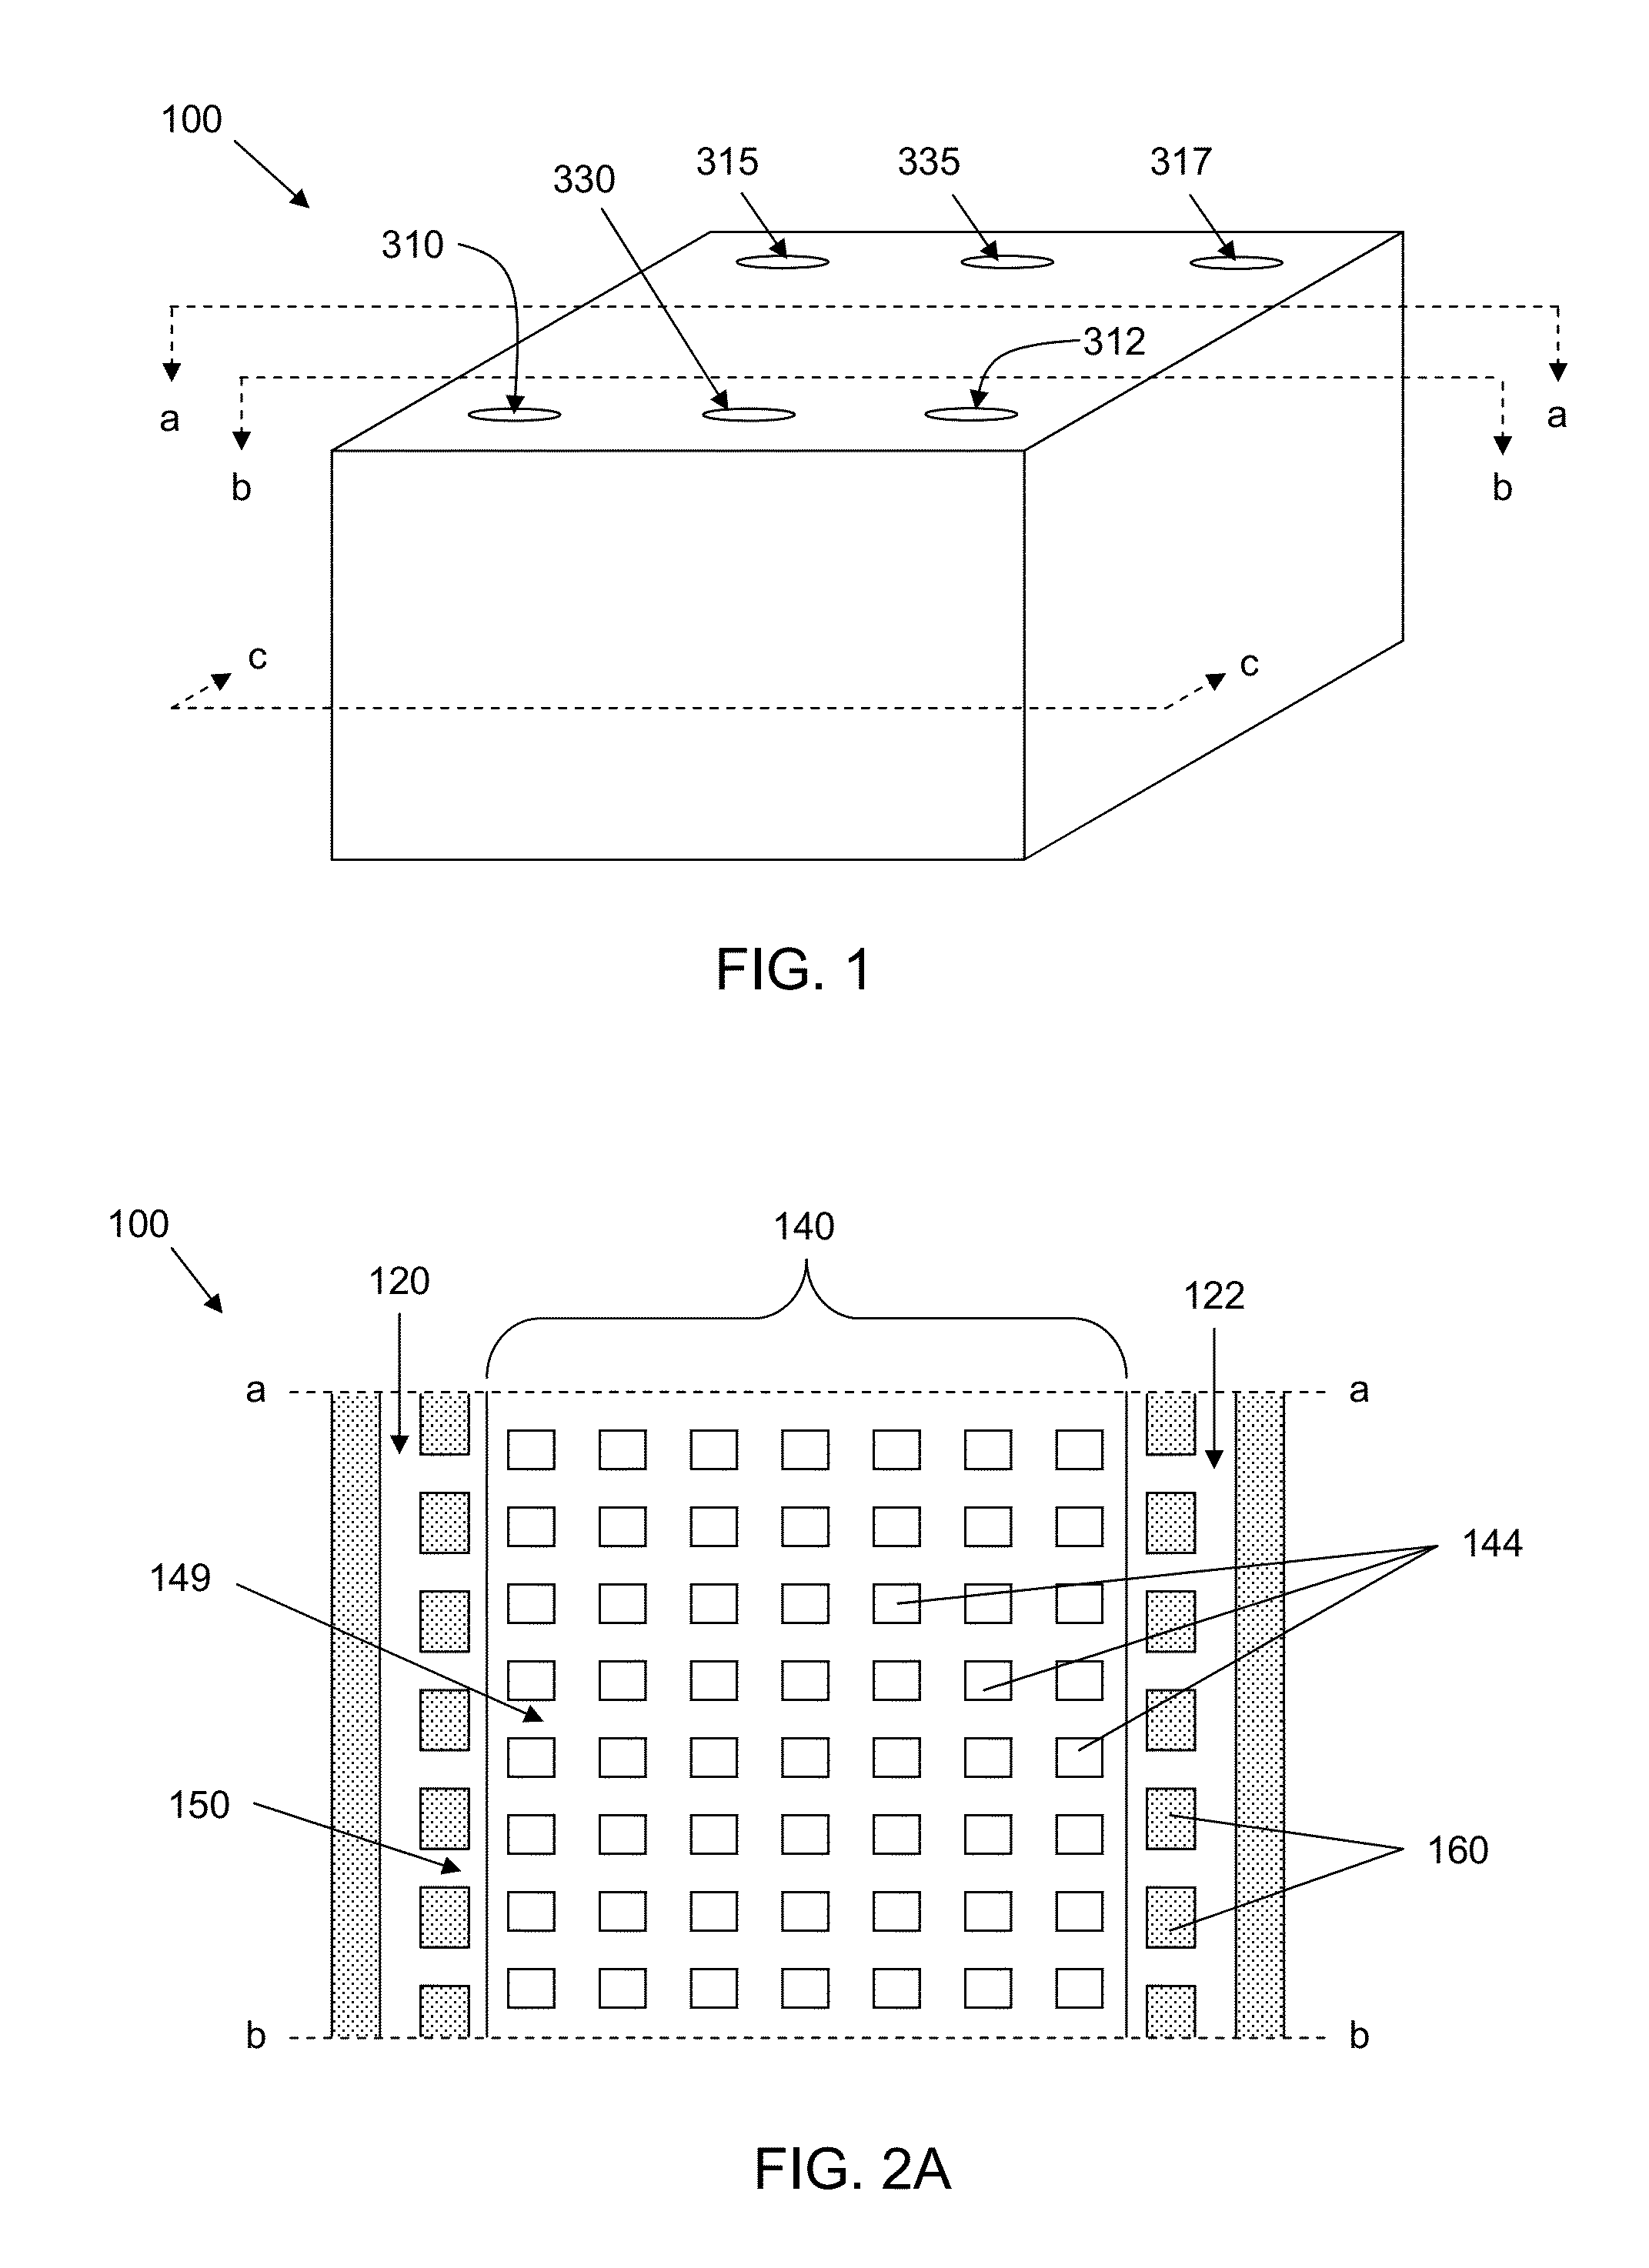 Microfluidic device for cell culture